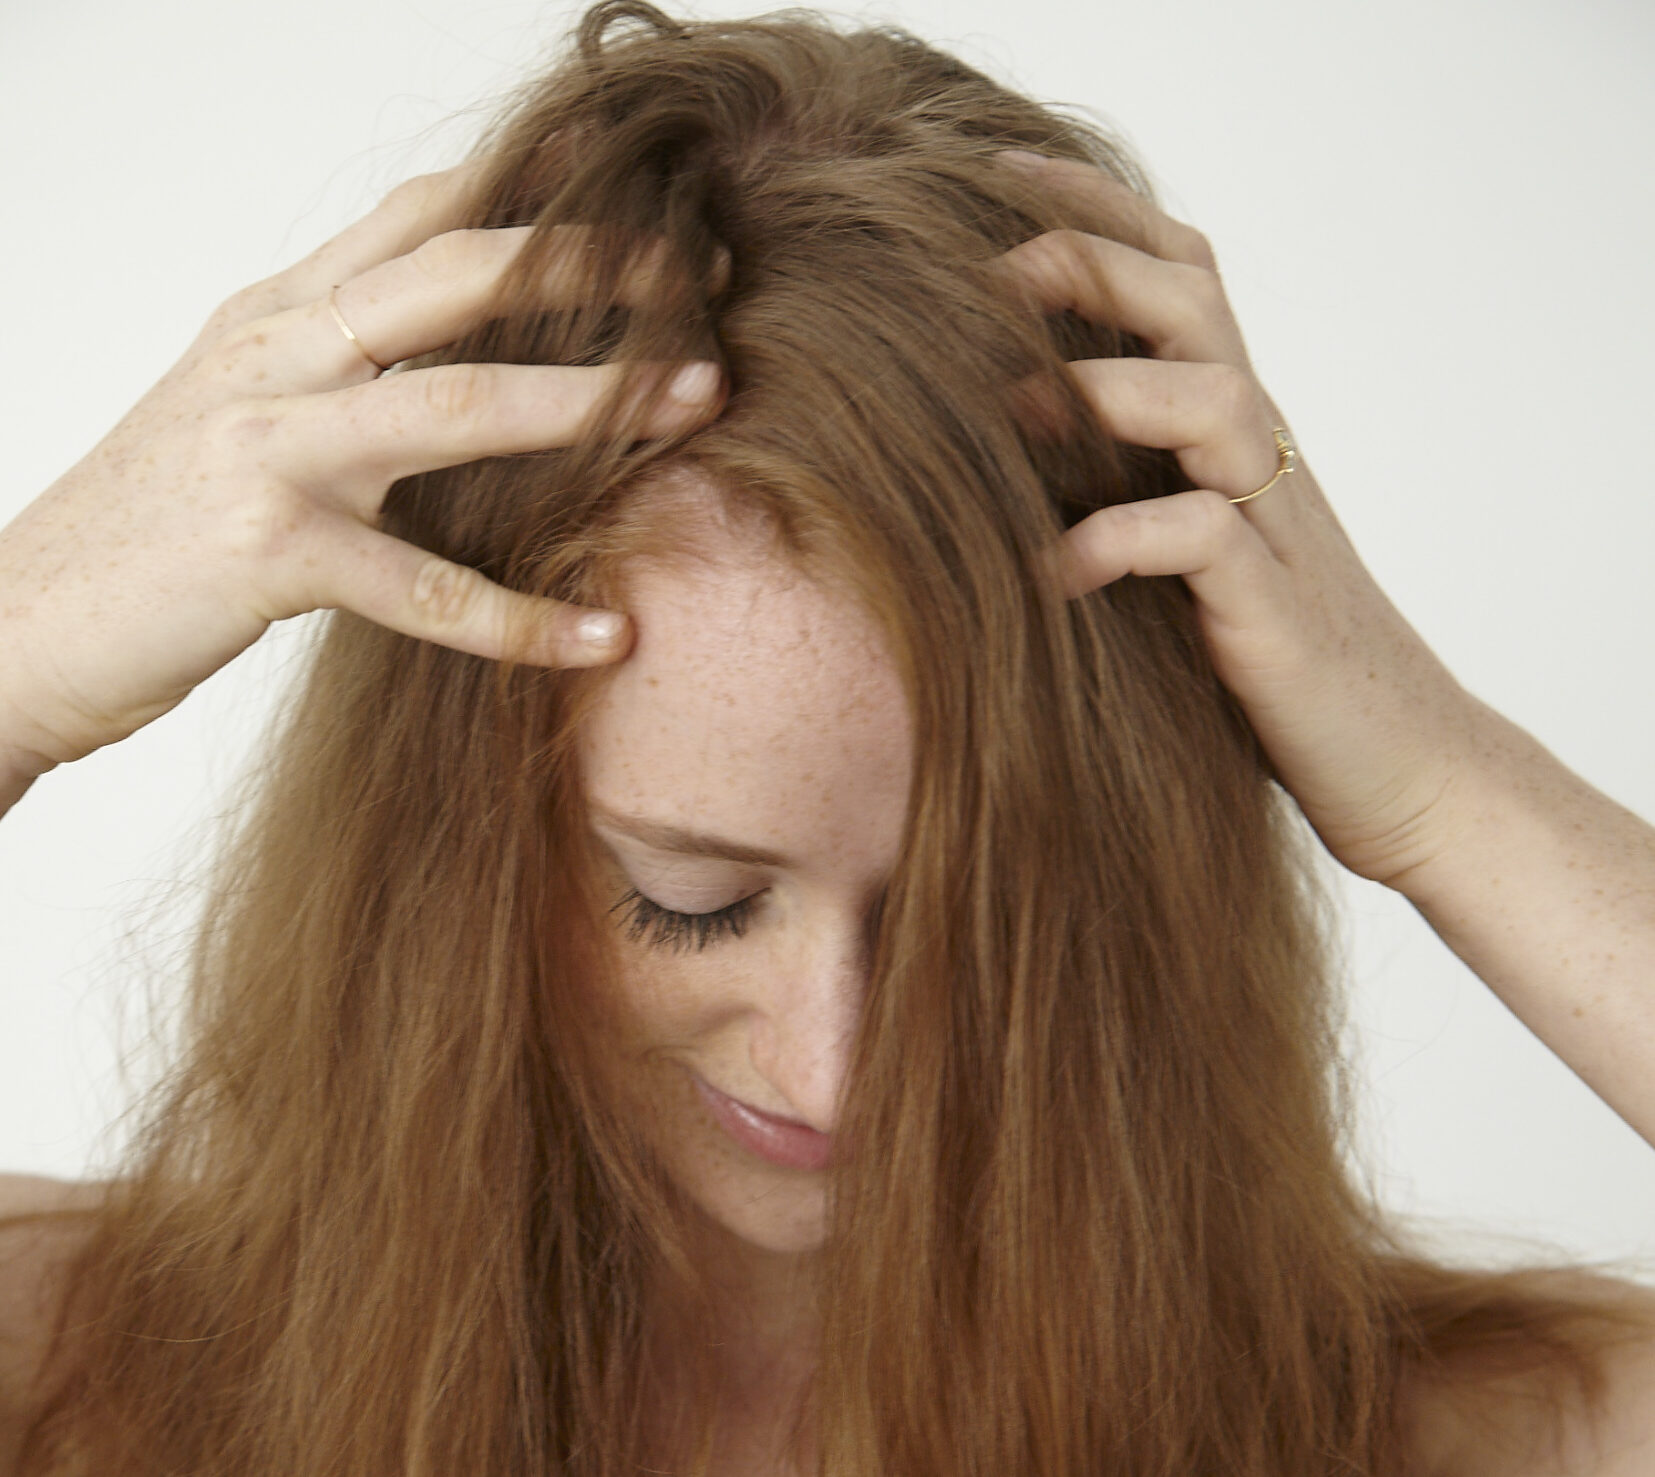 5 Best Remedies for Redheads With A Dry Scalp